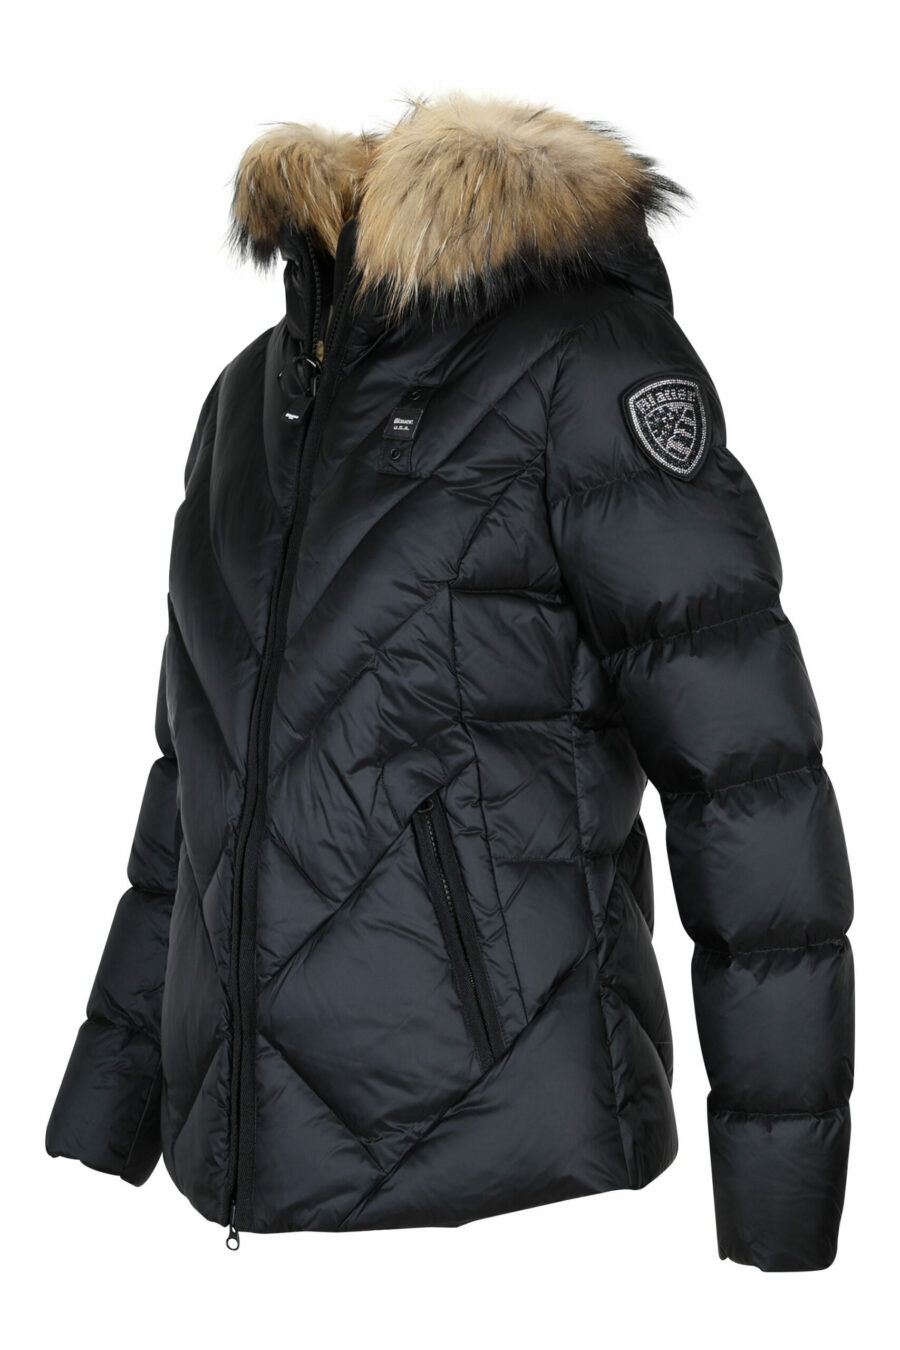 Black hooded jacket with fur hood and diagonal lines and beige lining - 8058610647070 1 scaled